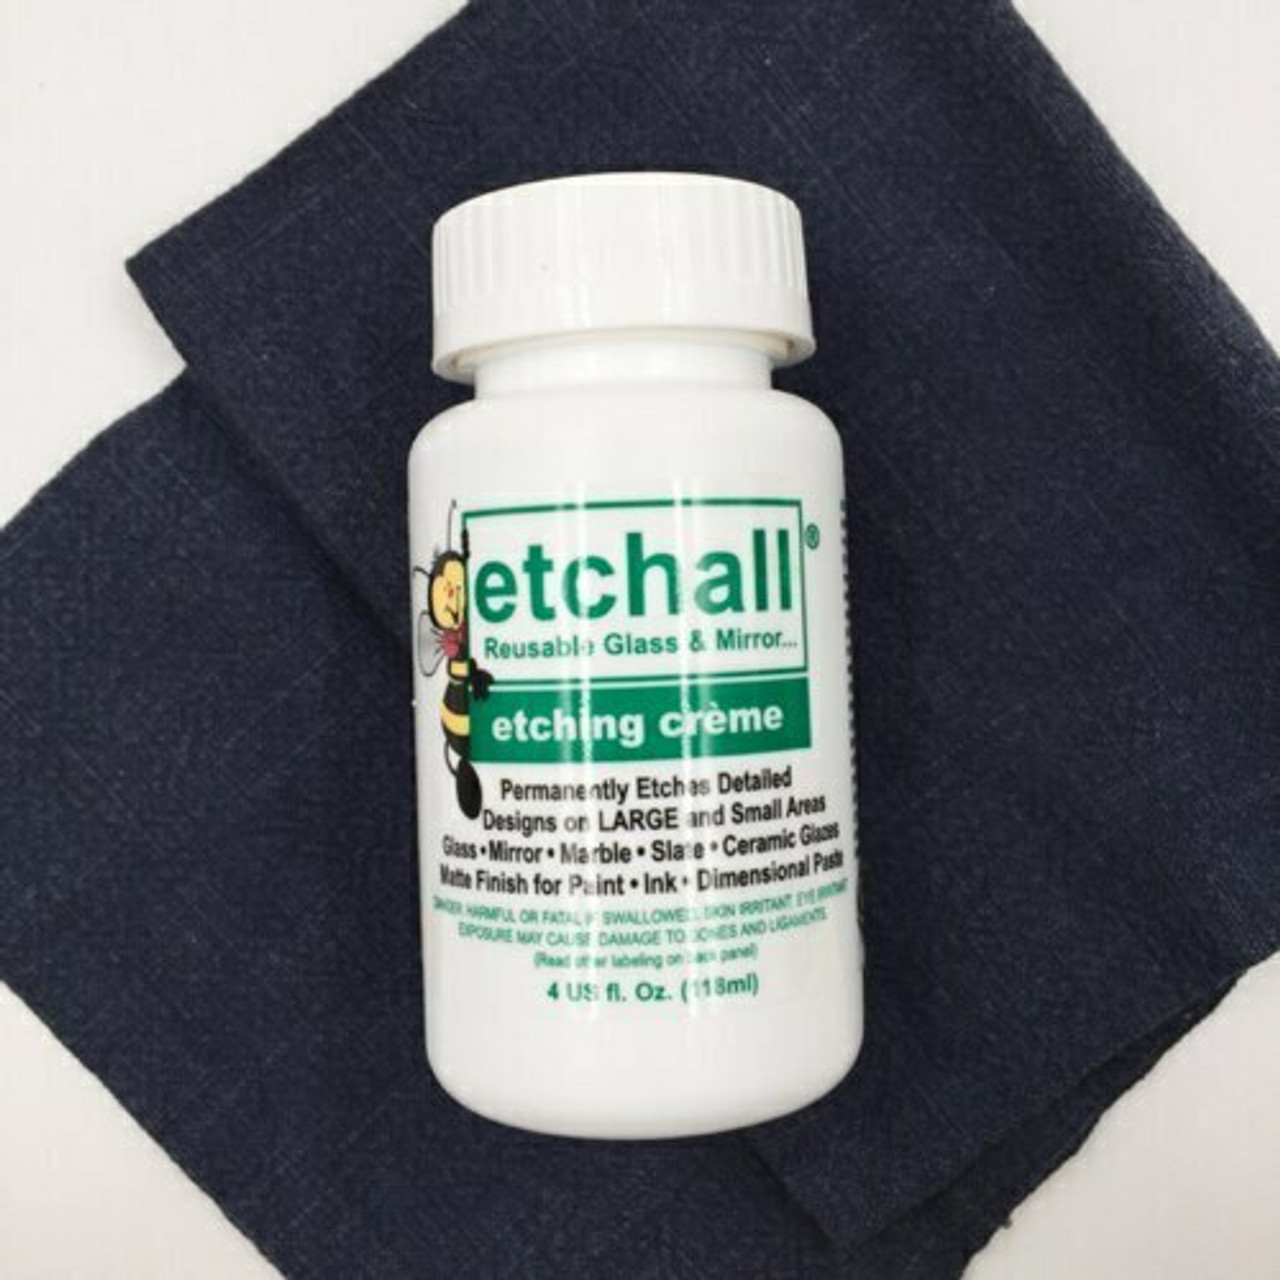 ETCHALL® ETCHING CREME (16 OZ) - GTIN/EAN/UPC 603442113163 - Product  Details - Cosmos